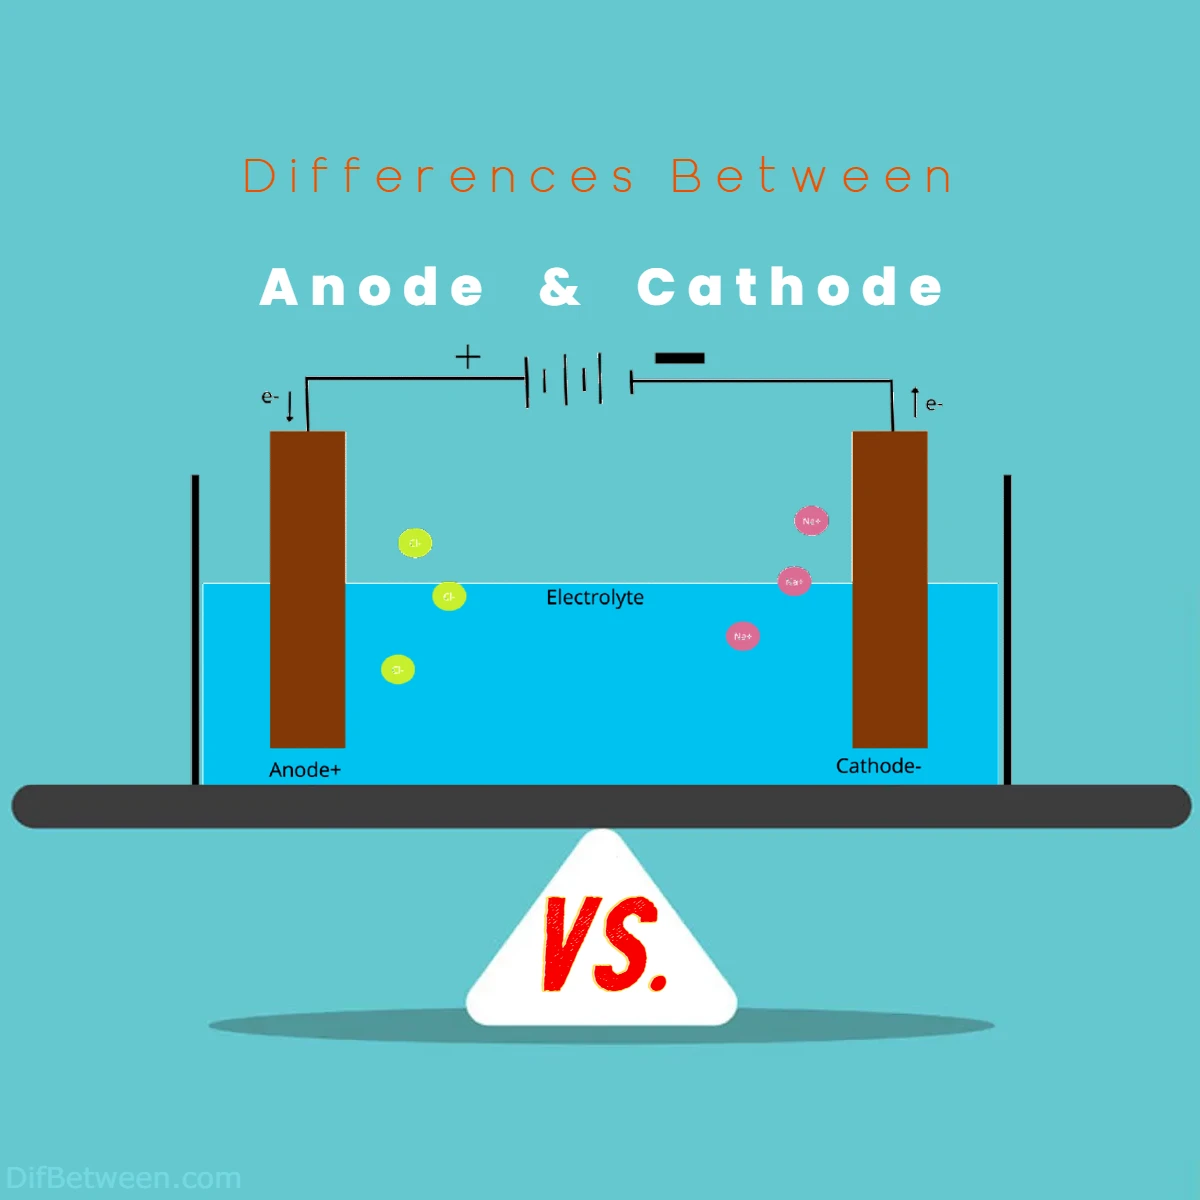 Differences Between Anode vs Cathode